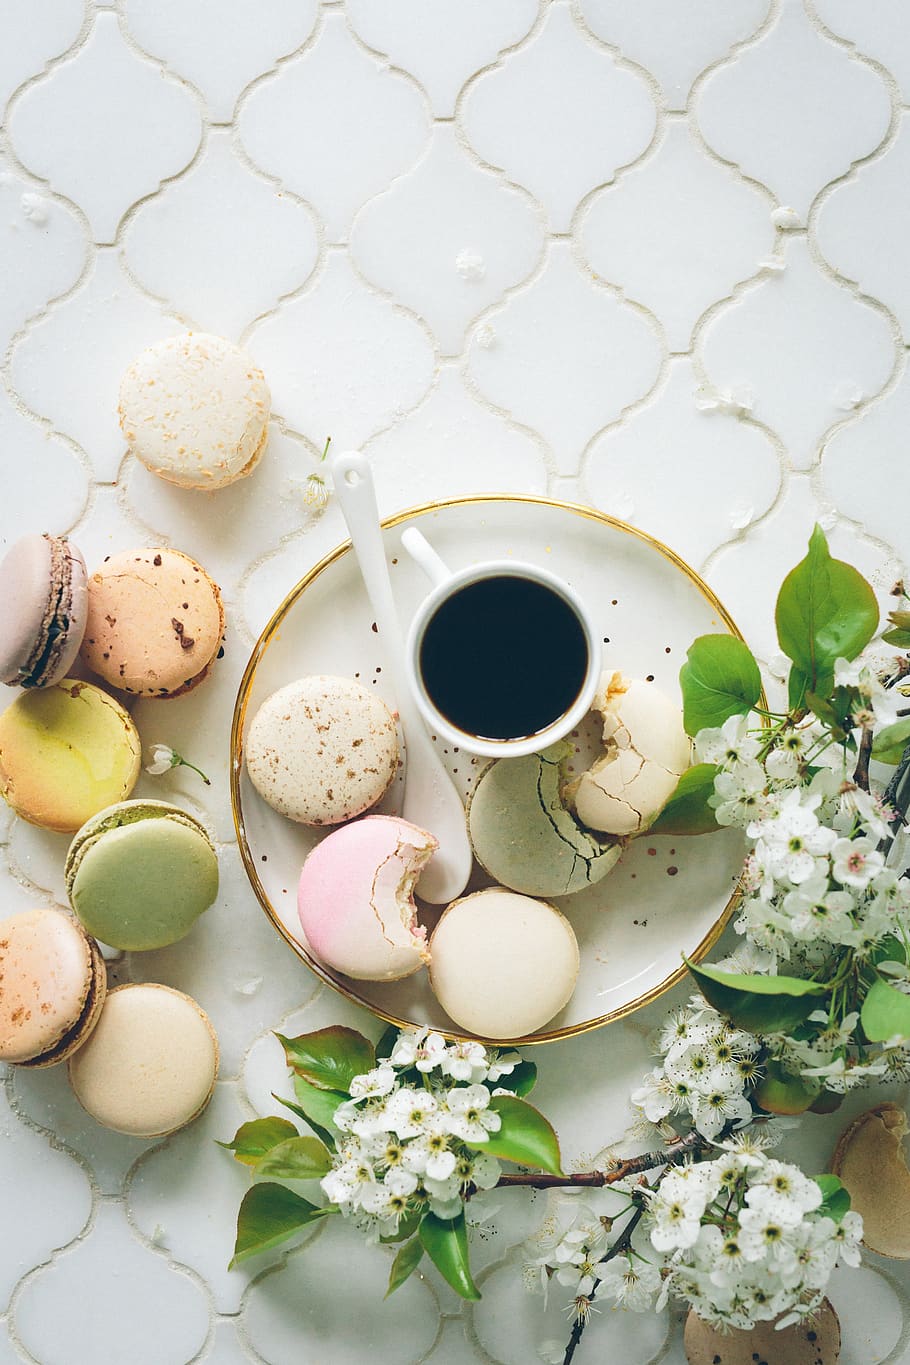 Hd Wallpaper Brunch Macaroons Tea Biscuits Afternoon Tea Sweets French Wallpaper Flare